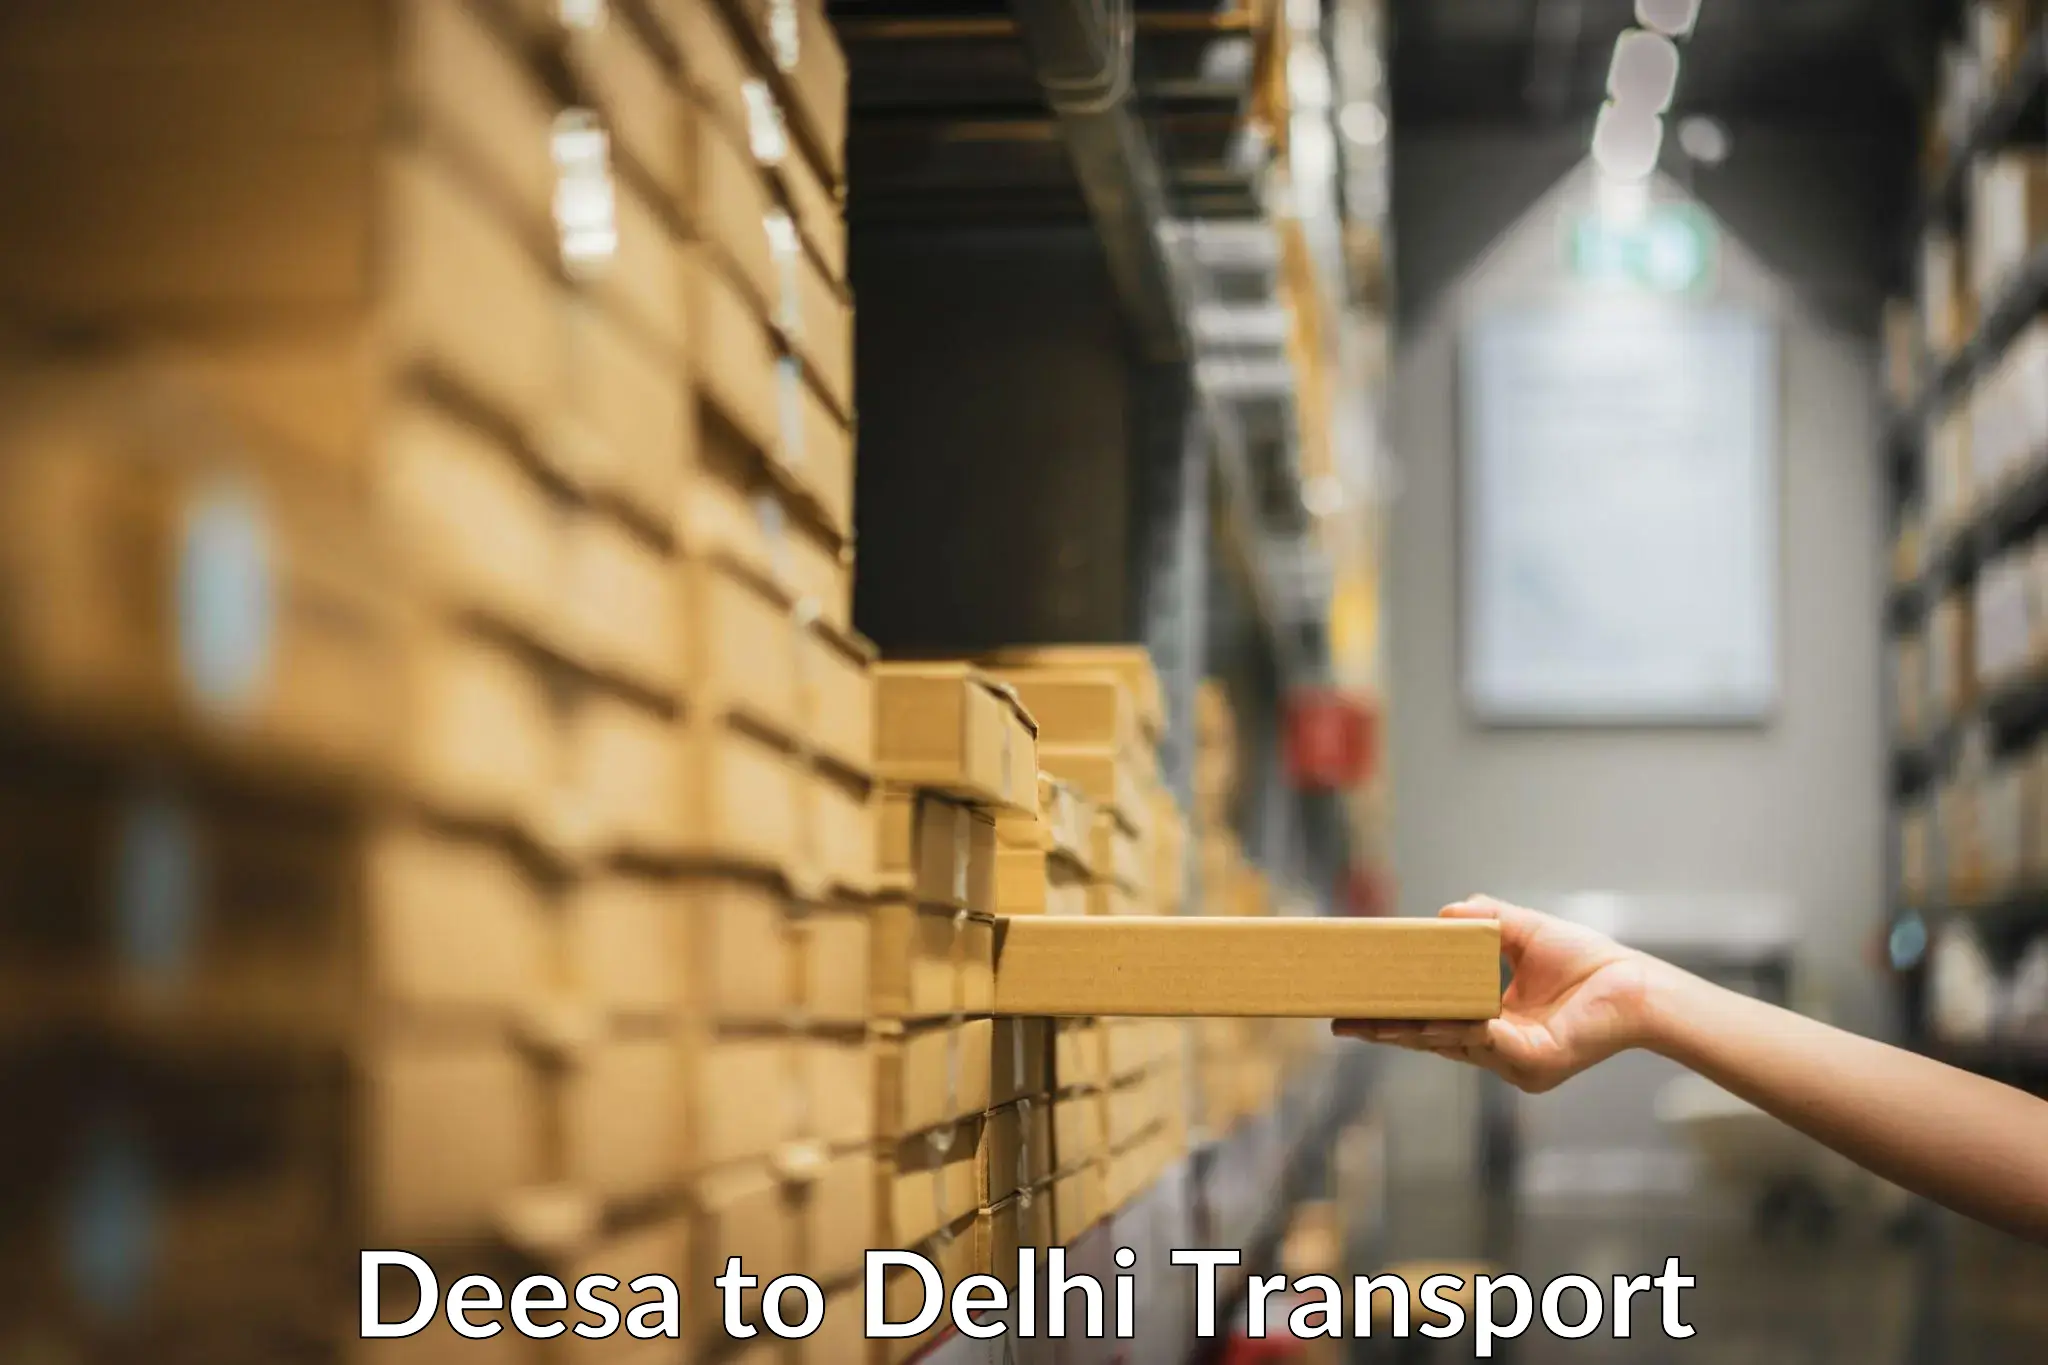 Domestic goods transportation services Deesa to NCR